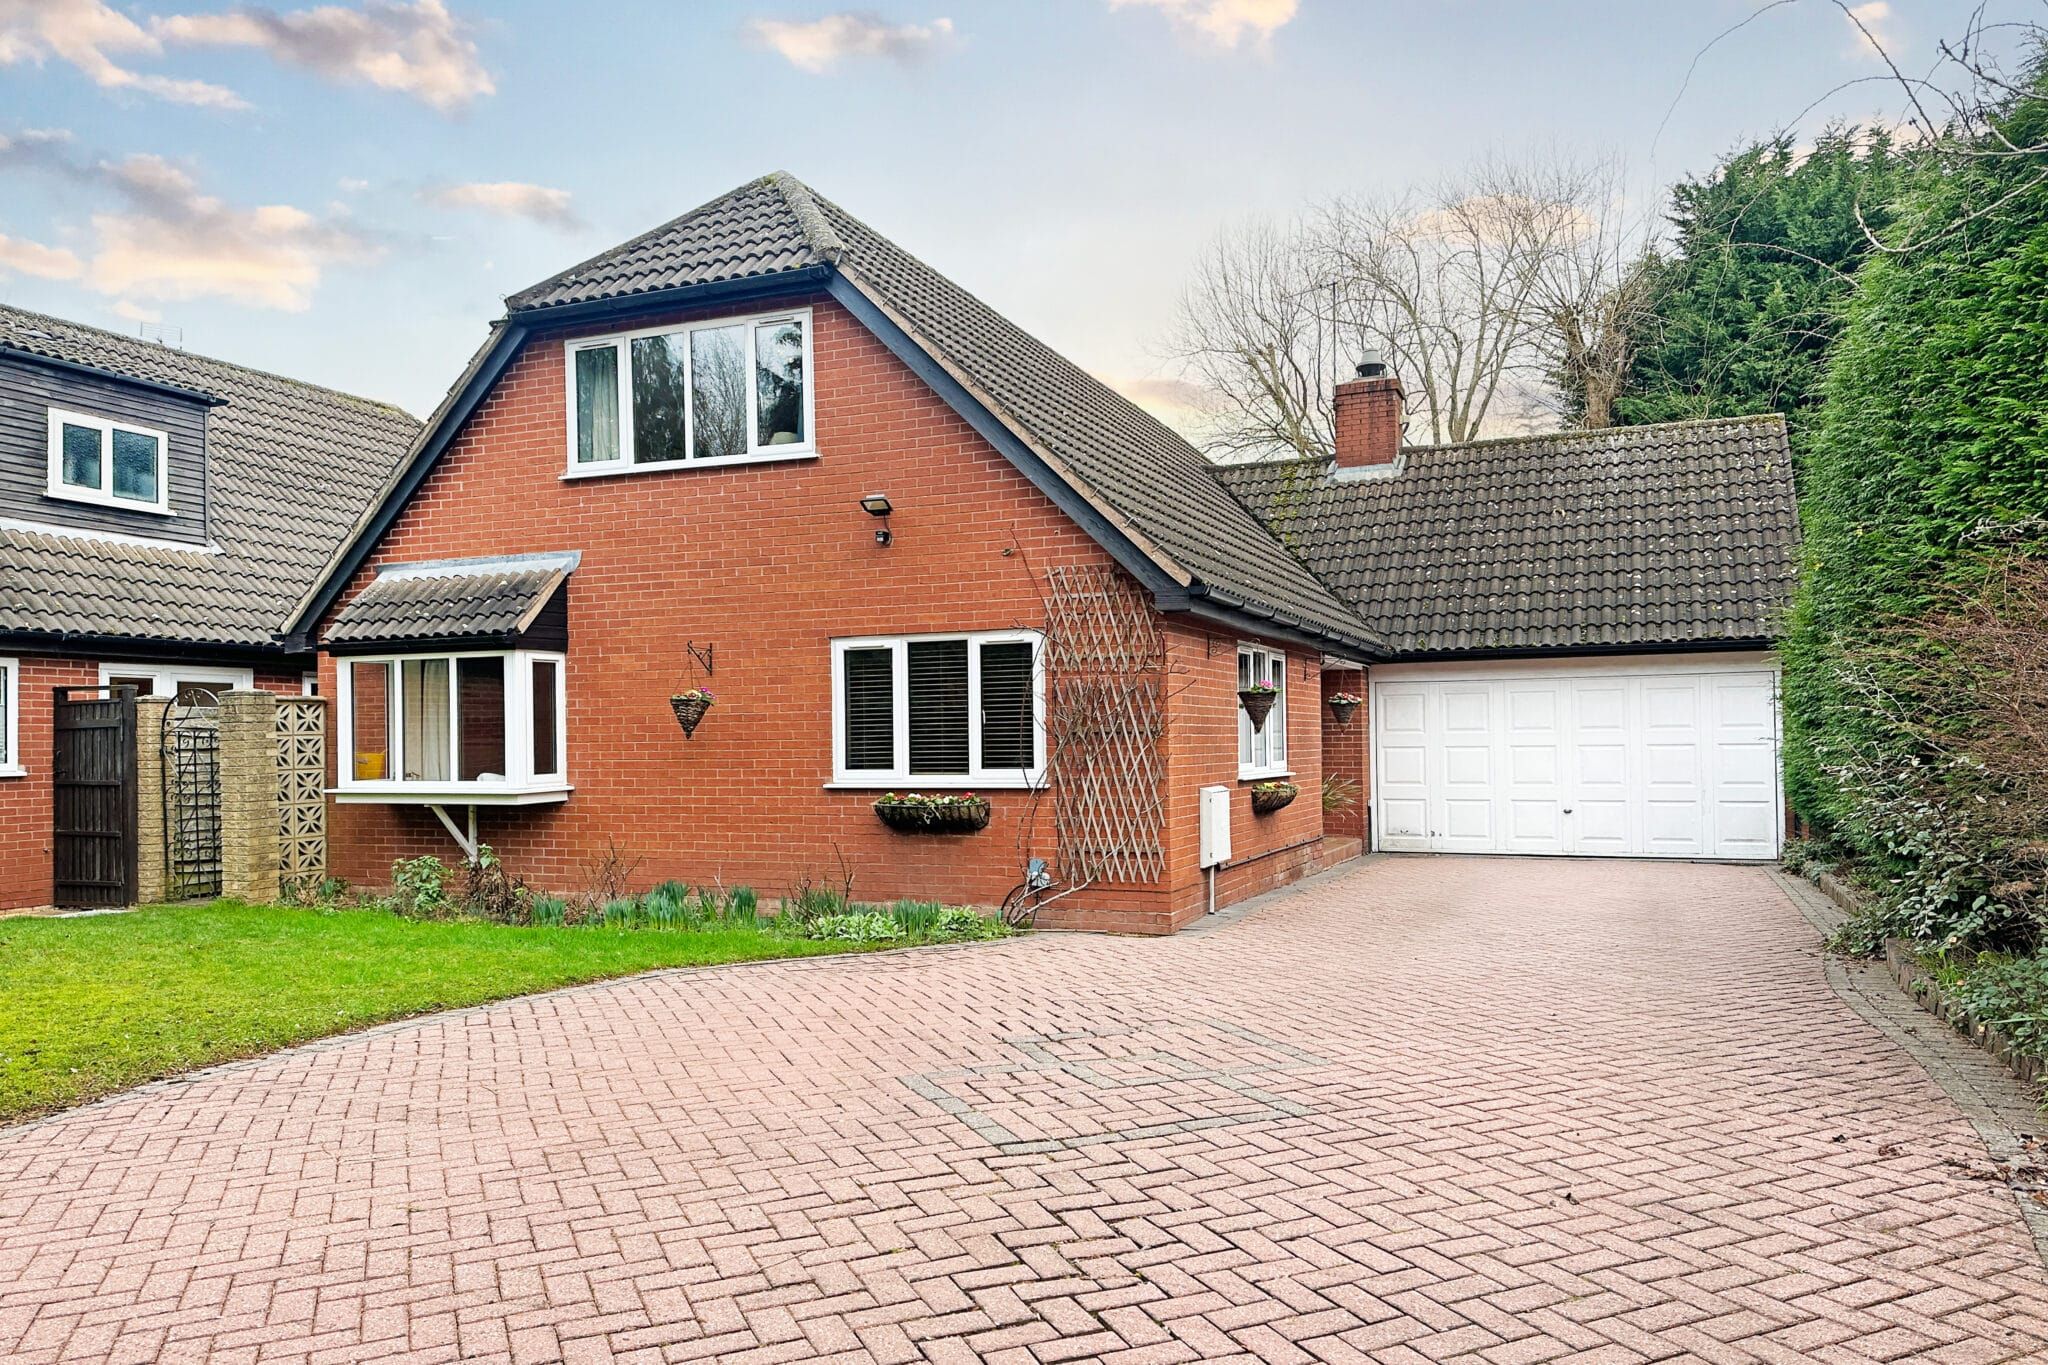 Arden Vale Road, Knowle, Solihull, Solihull, B93 9NS